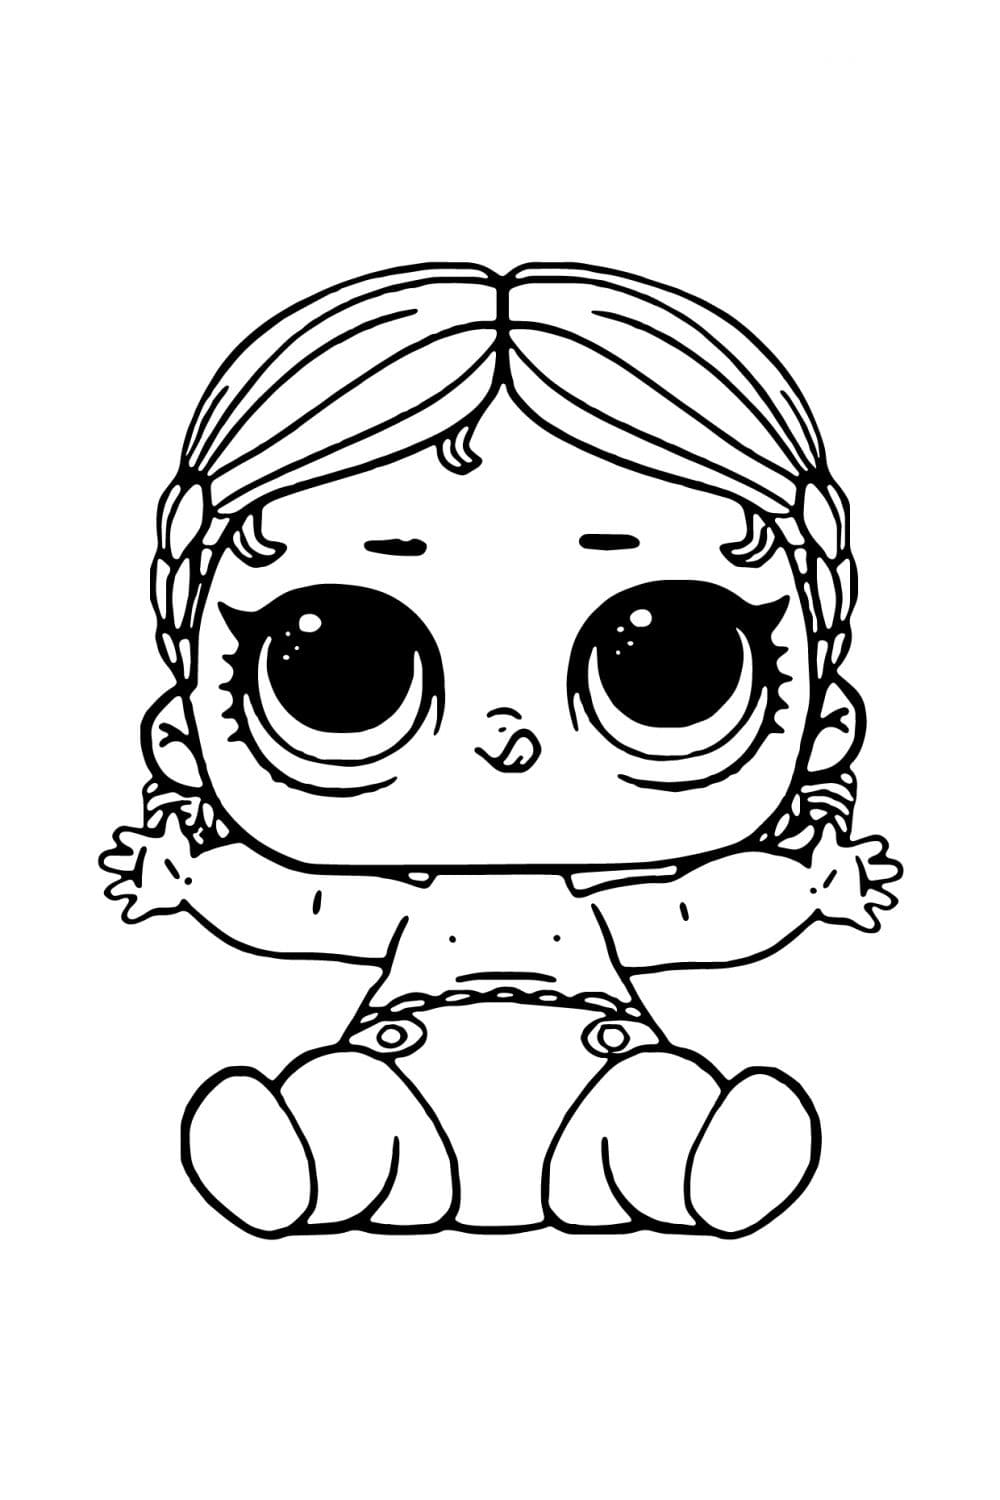 LOL Baby Coloring Pages - Free Printable Coloring Pages for Kids